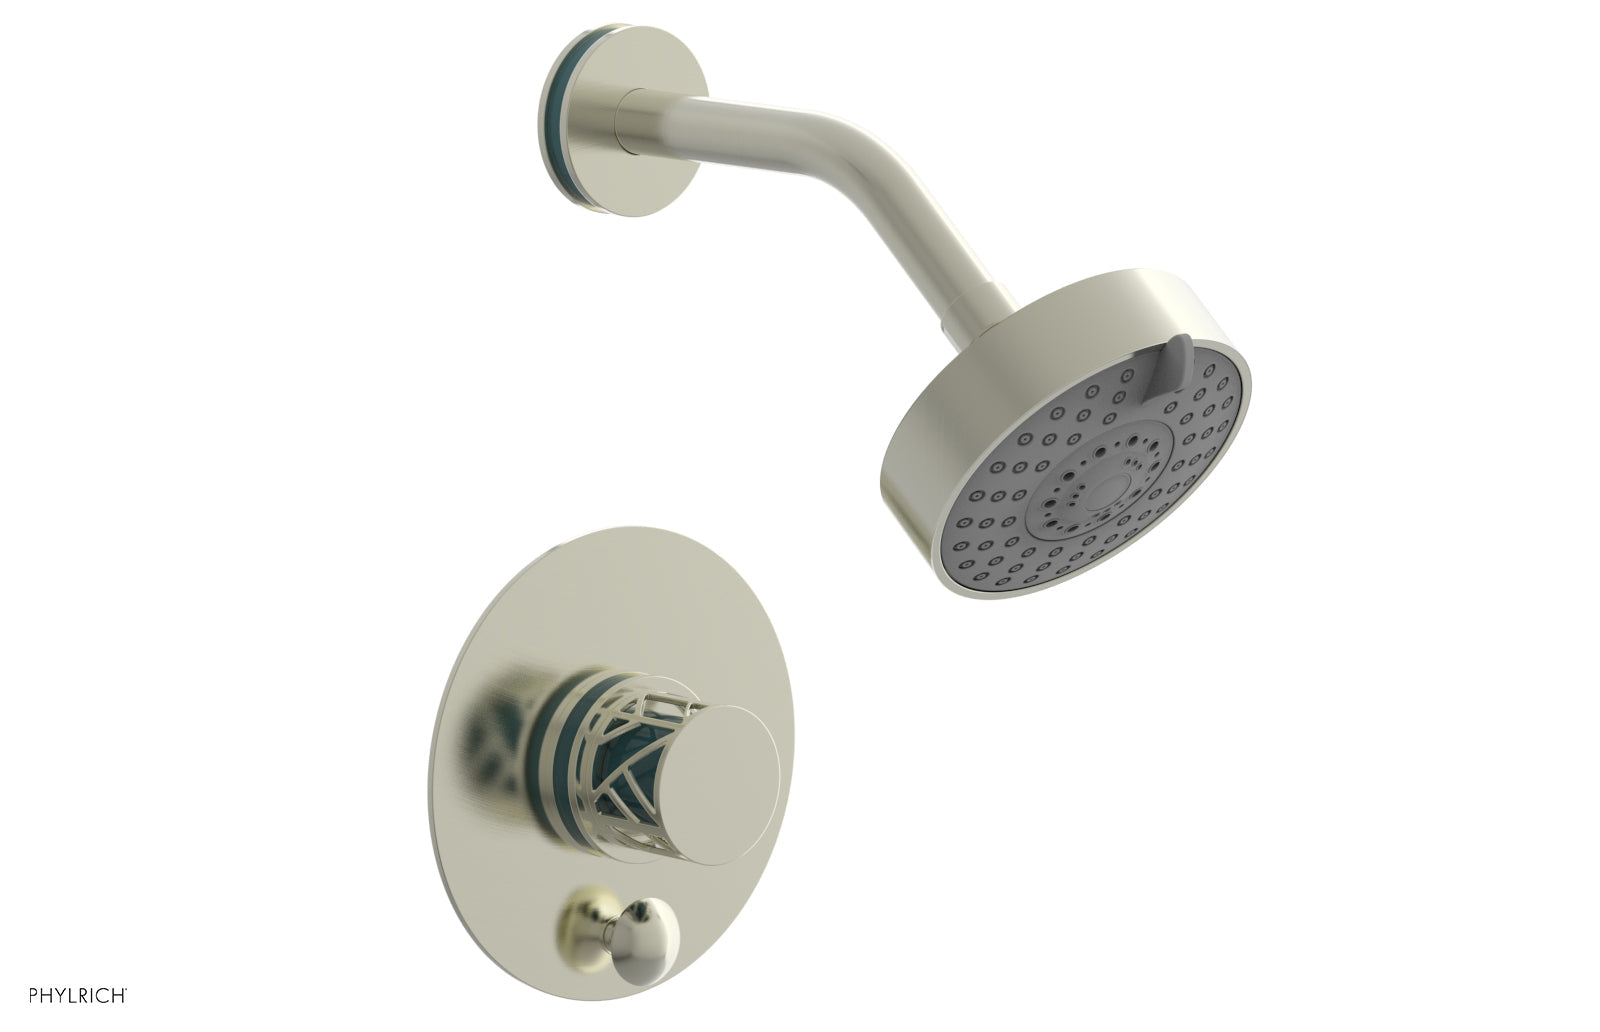 Phylrich JOLIE Pressure Balance Shower and Diverter Set (Less Spout), Round Handle with "Turquoise" Accents